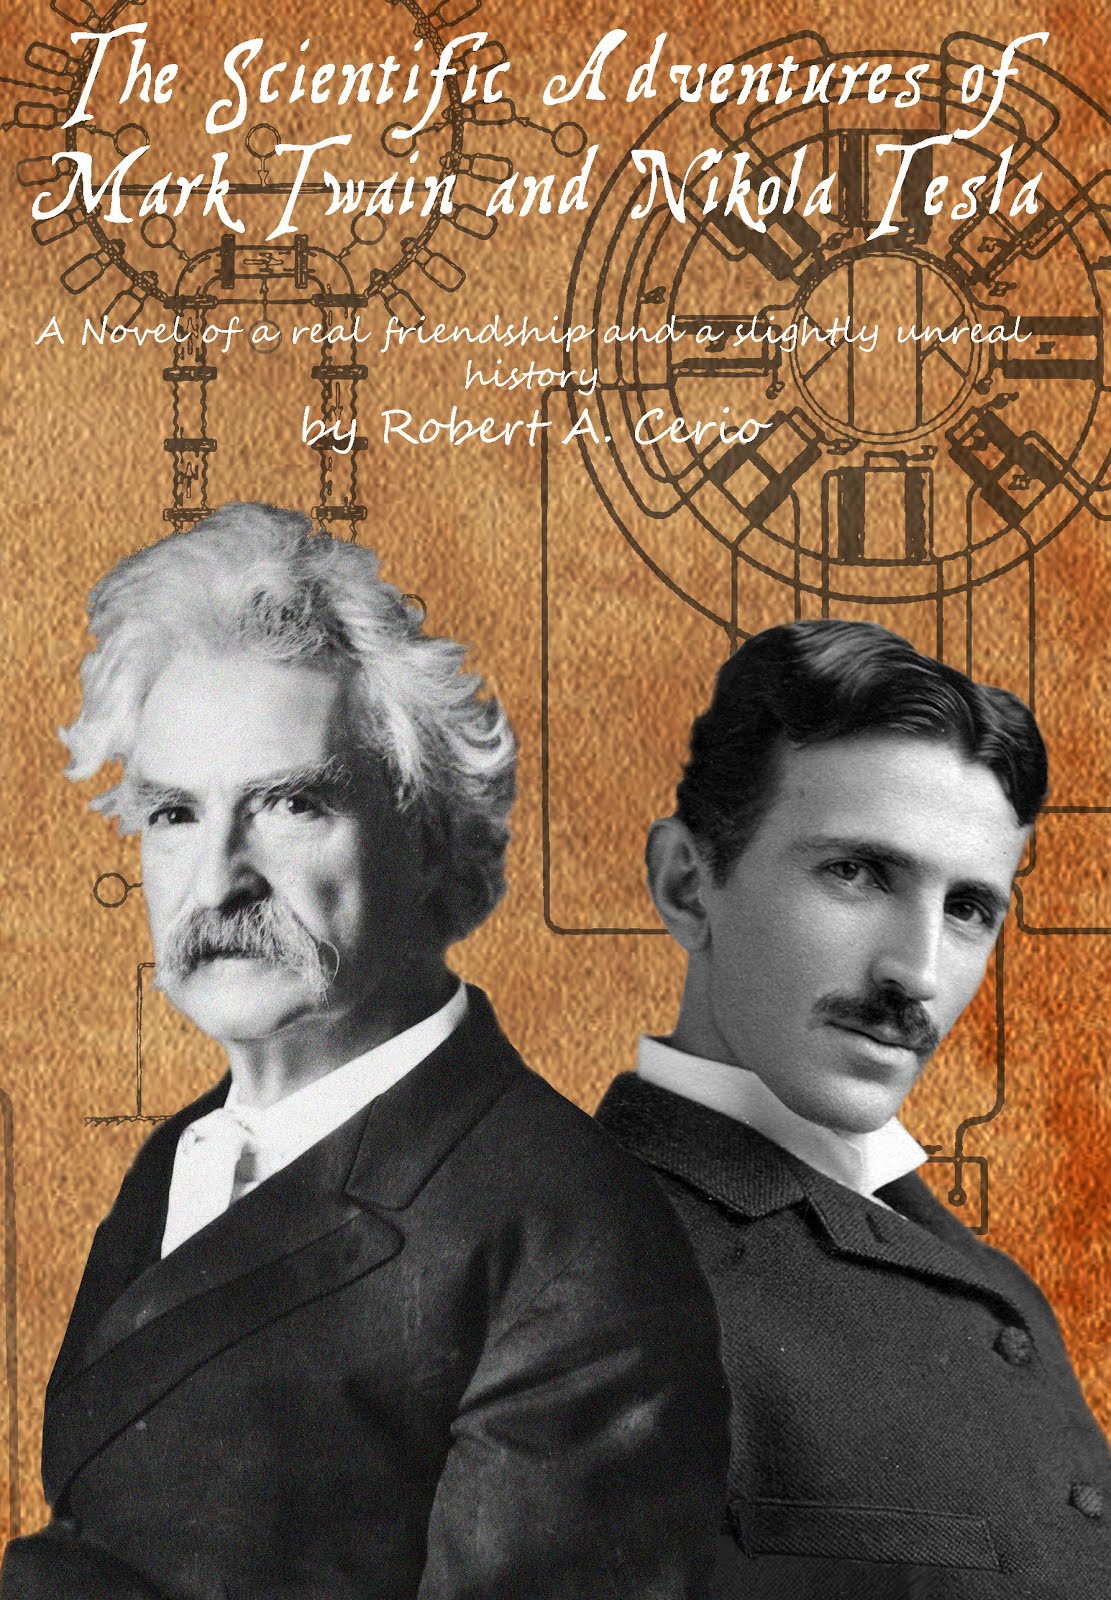 NEW! Collection of Rob's Popular Twain and Tesla stories!